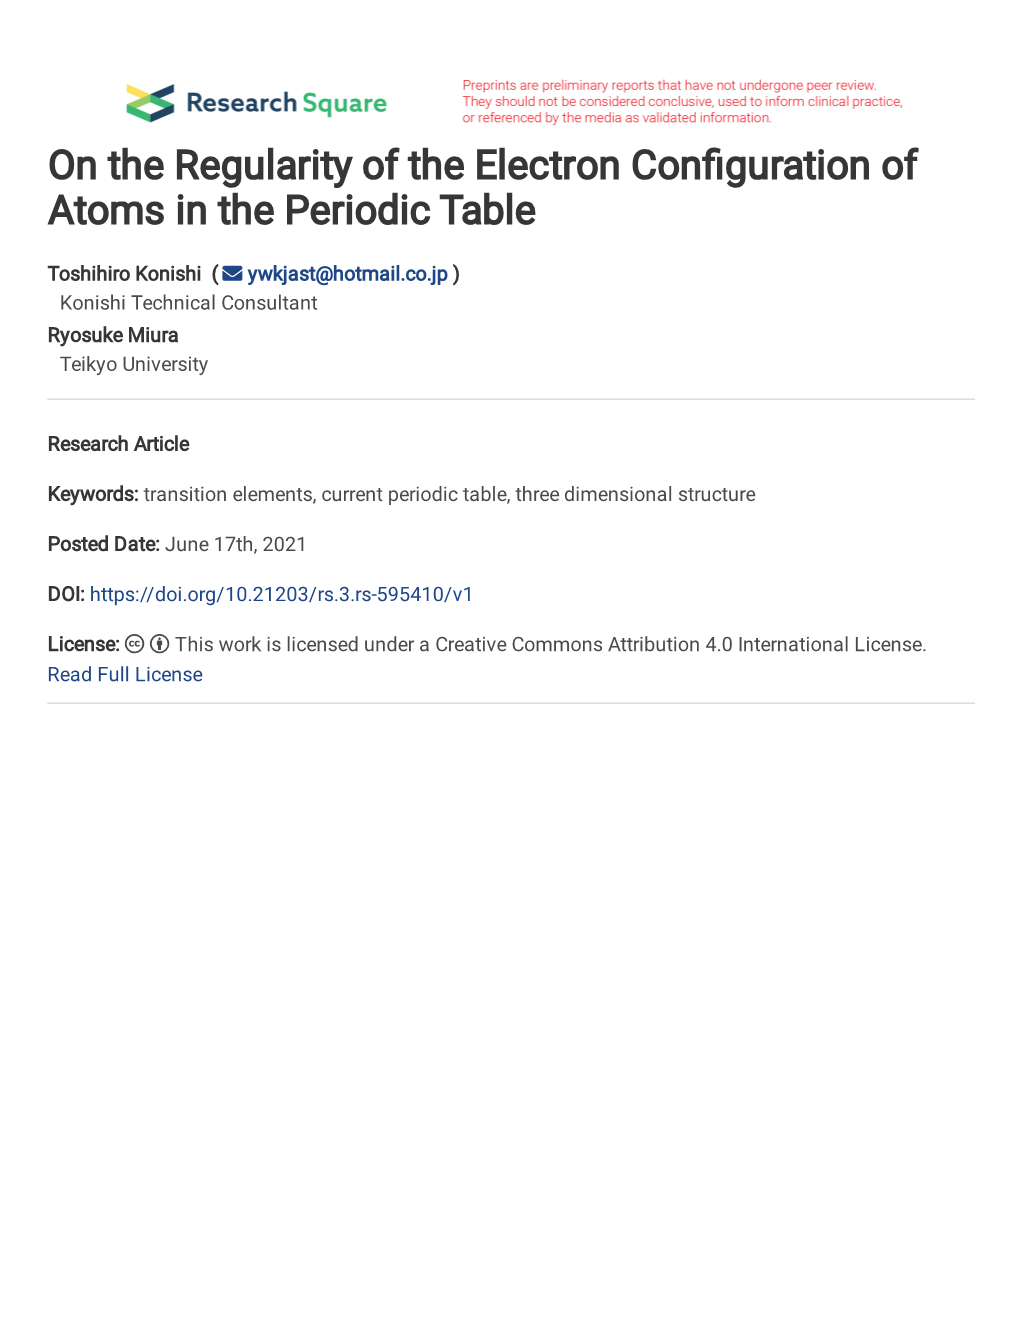 On the Regularity of the Electron Con Guration of Atoms in the Periodic